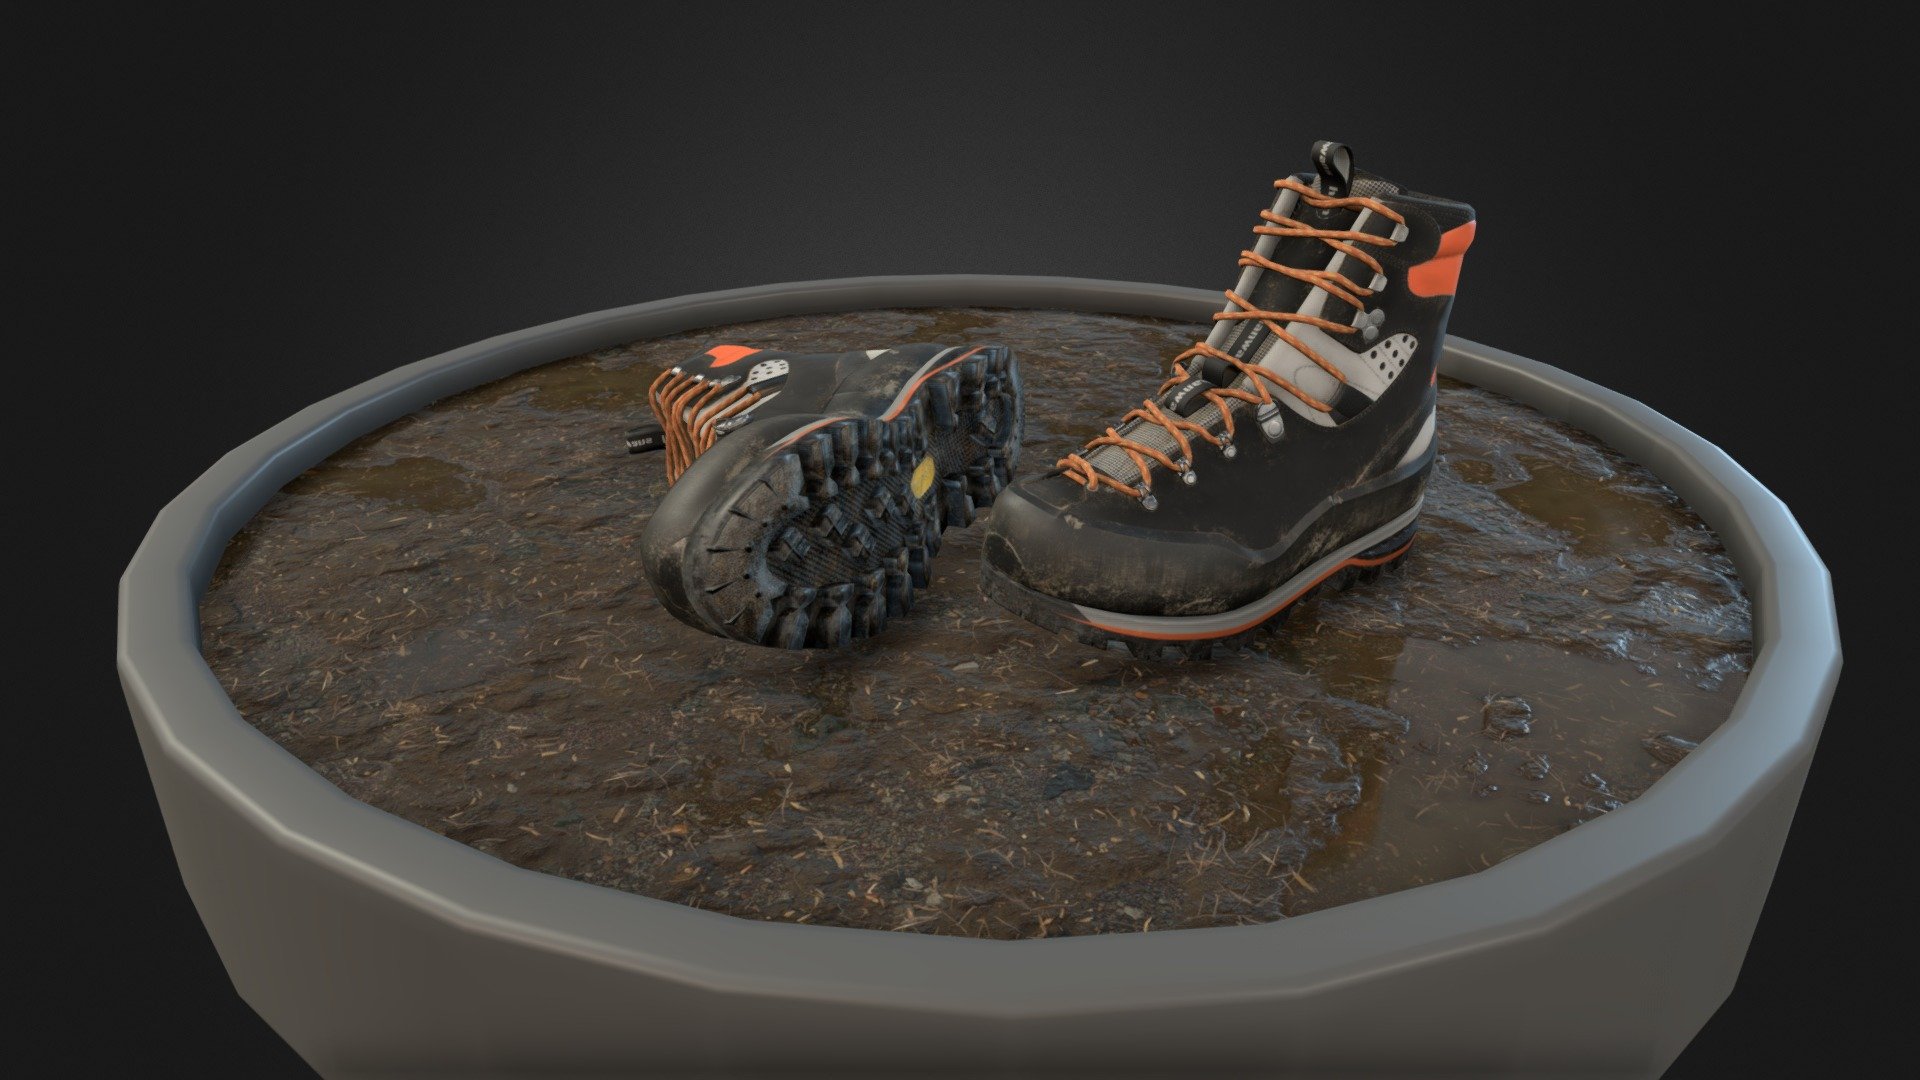 Personal project to practice the complete game assets creation pipeline.

Artstation for WIP and details:
https://www.artstation.com/artwork/q9JqlP - Mountaineering Boot - 3D model by Amad Junaid (@amadjunaid) 3d model